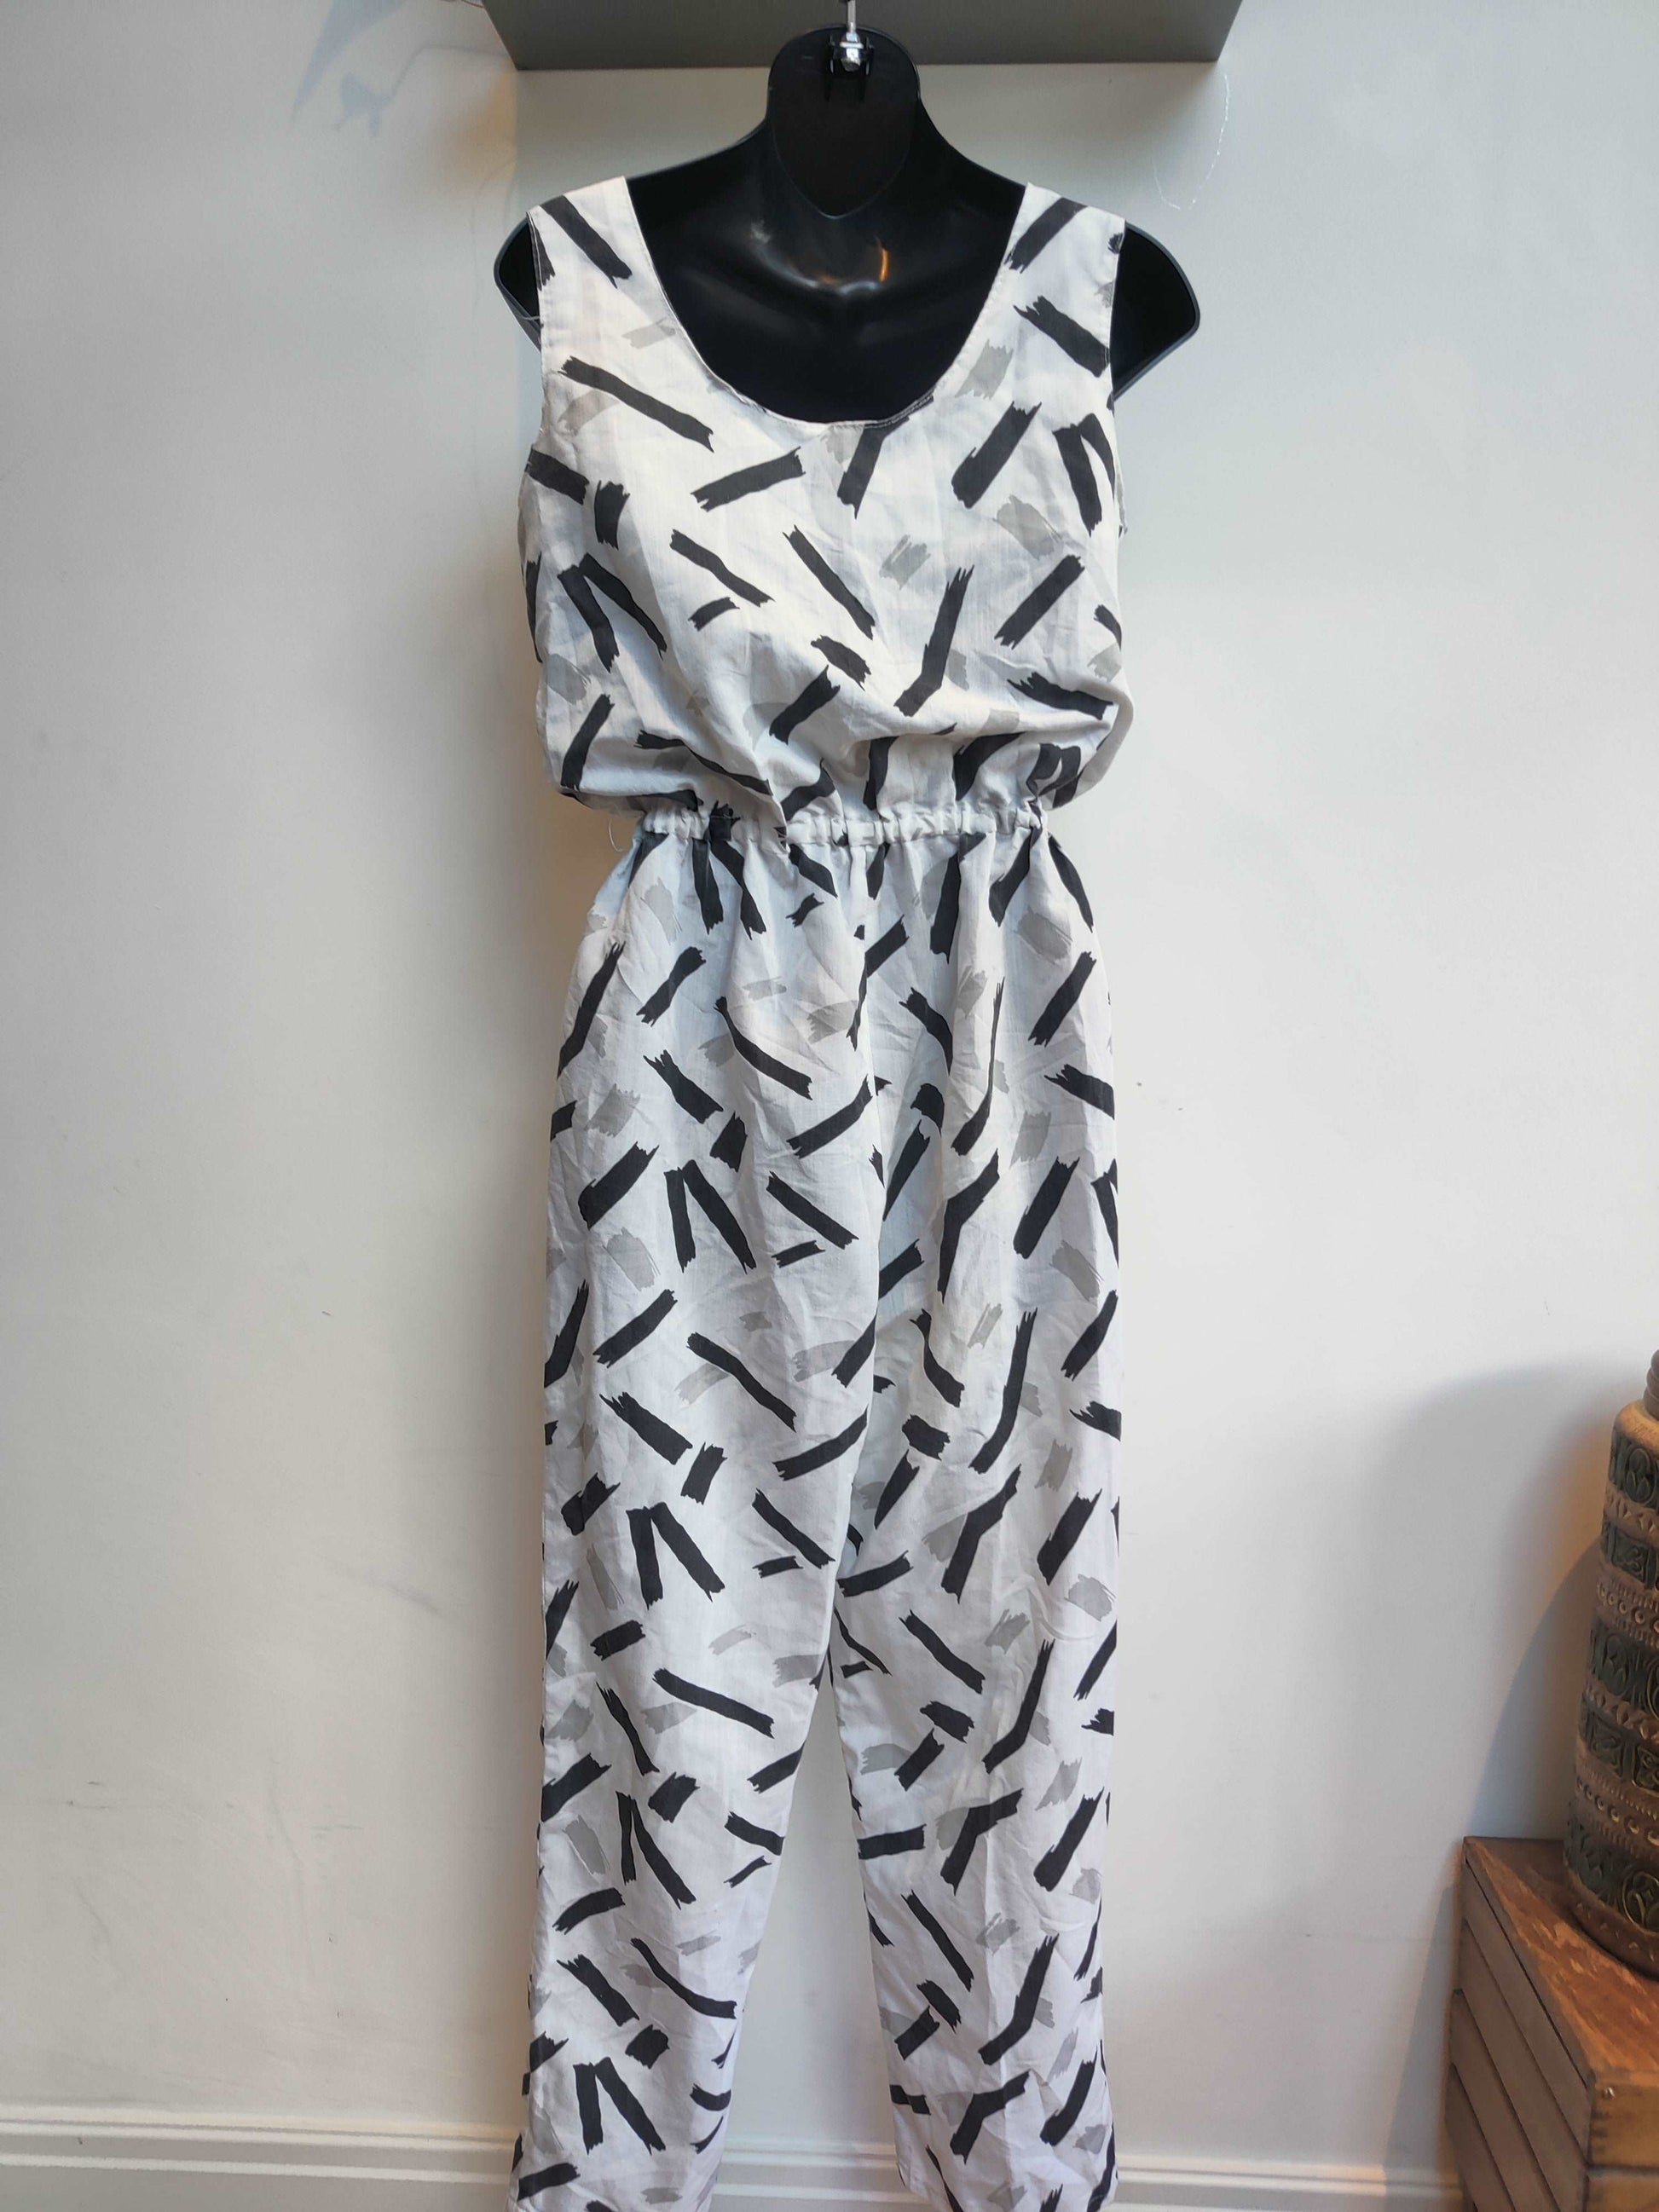 Incredible 80s jumpsuit with black and grey sprinkle print